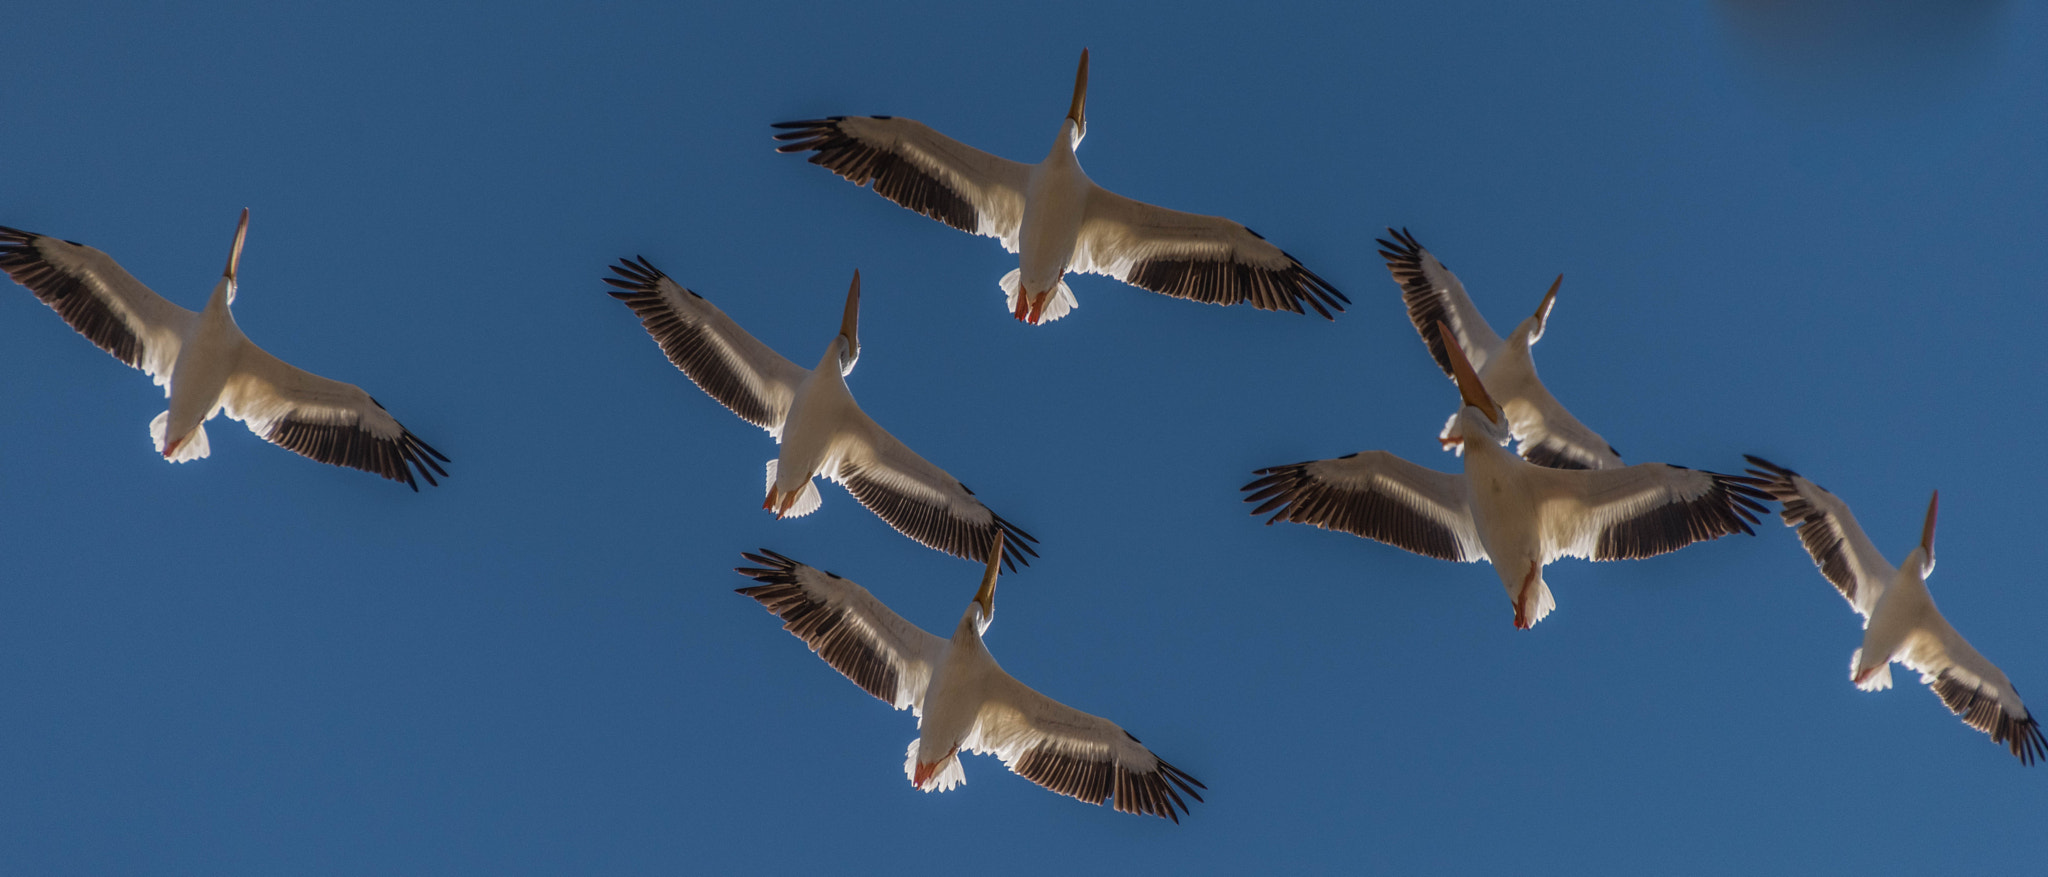 Nikon D810 sample photo. Pelicans flying over the pacific photography